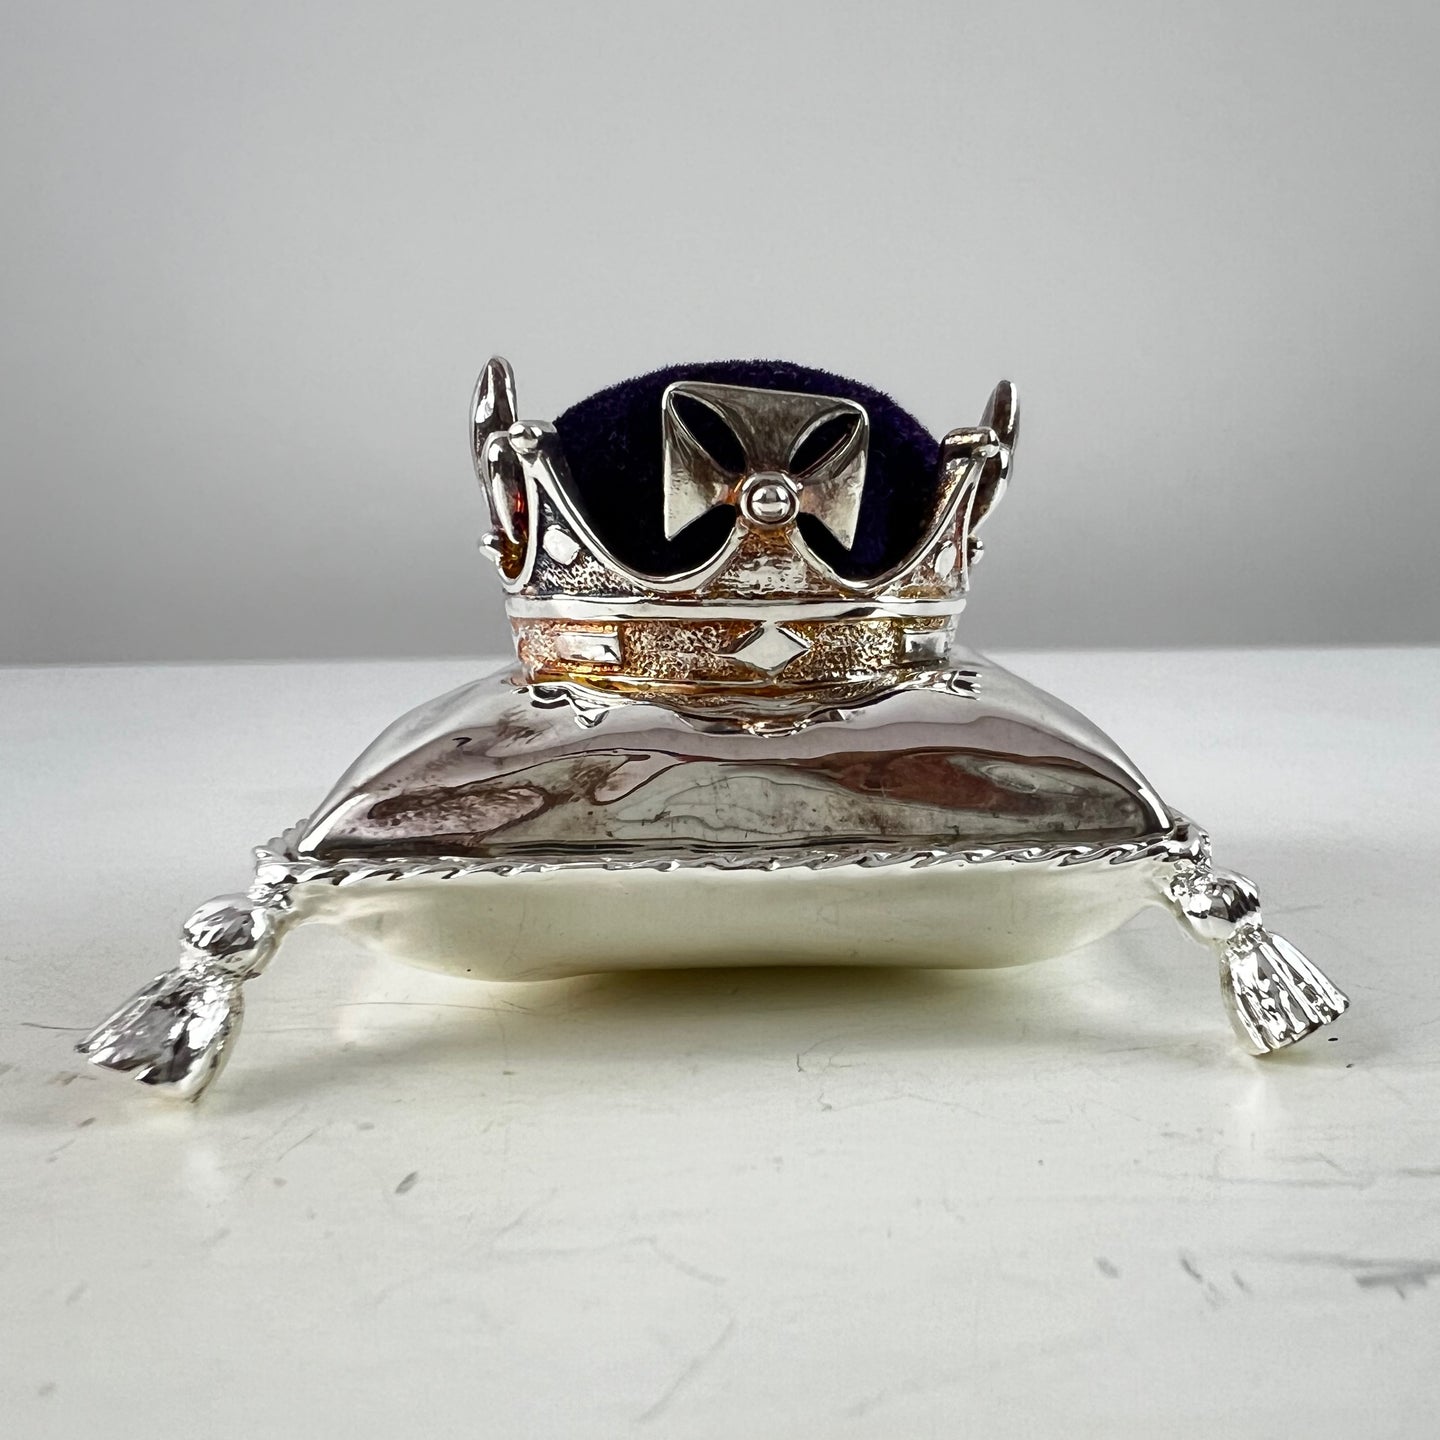 Vintage Silver Plate Crown on Pillow Ring Gift Box